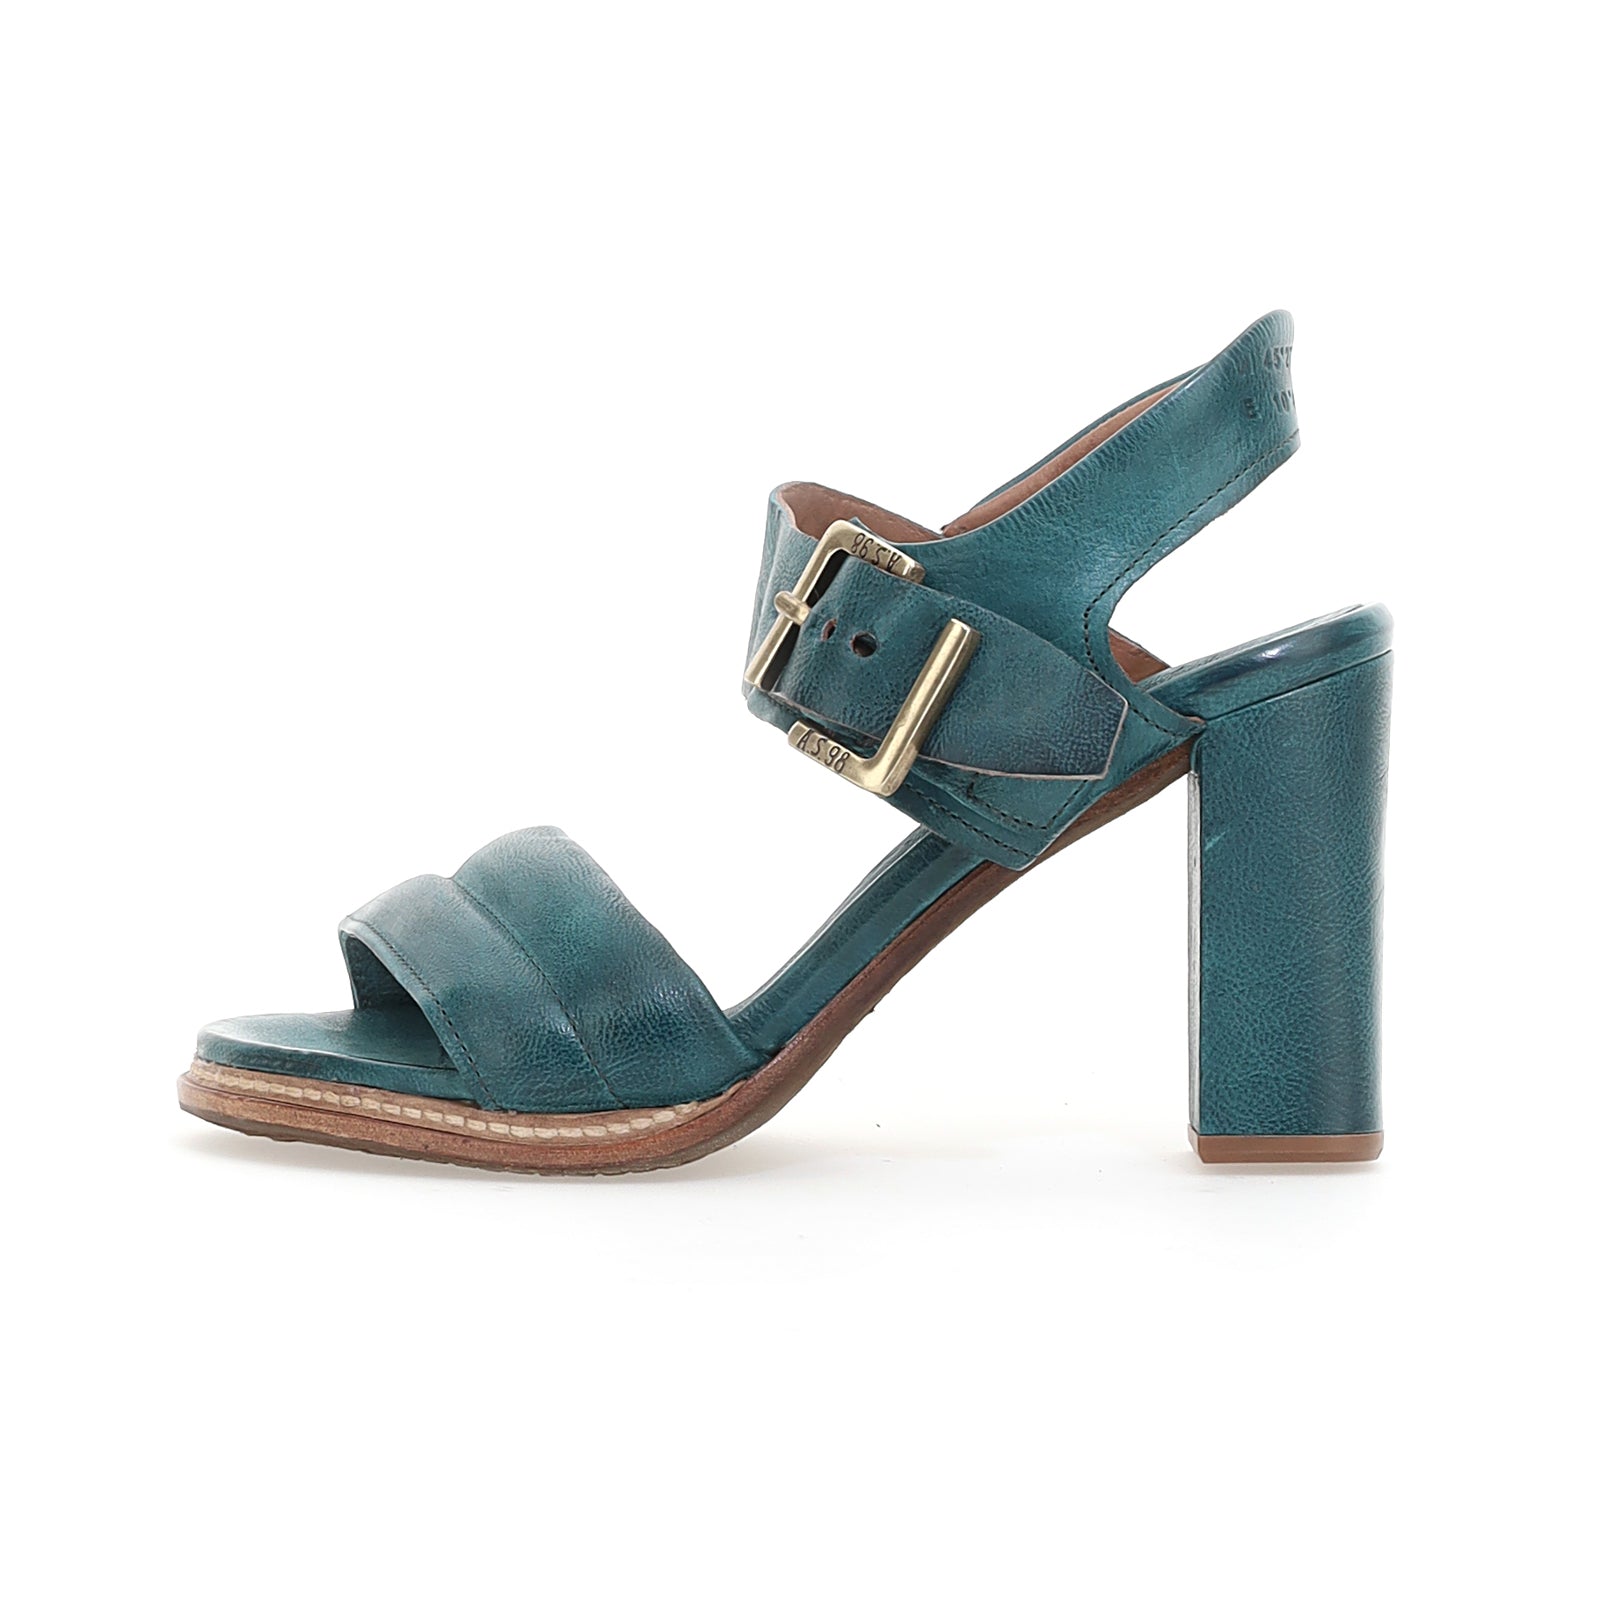 A.S.98 - brittany - Heel - Sandal